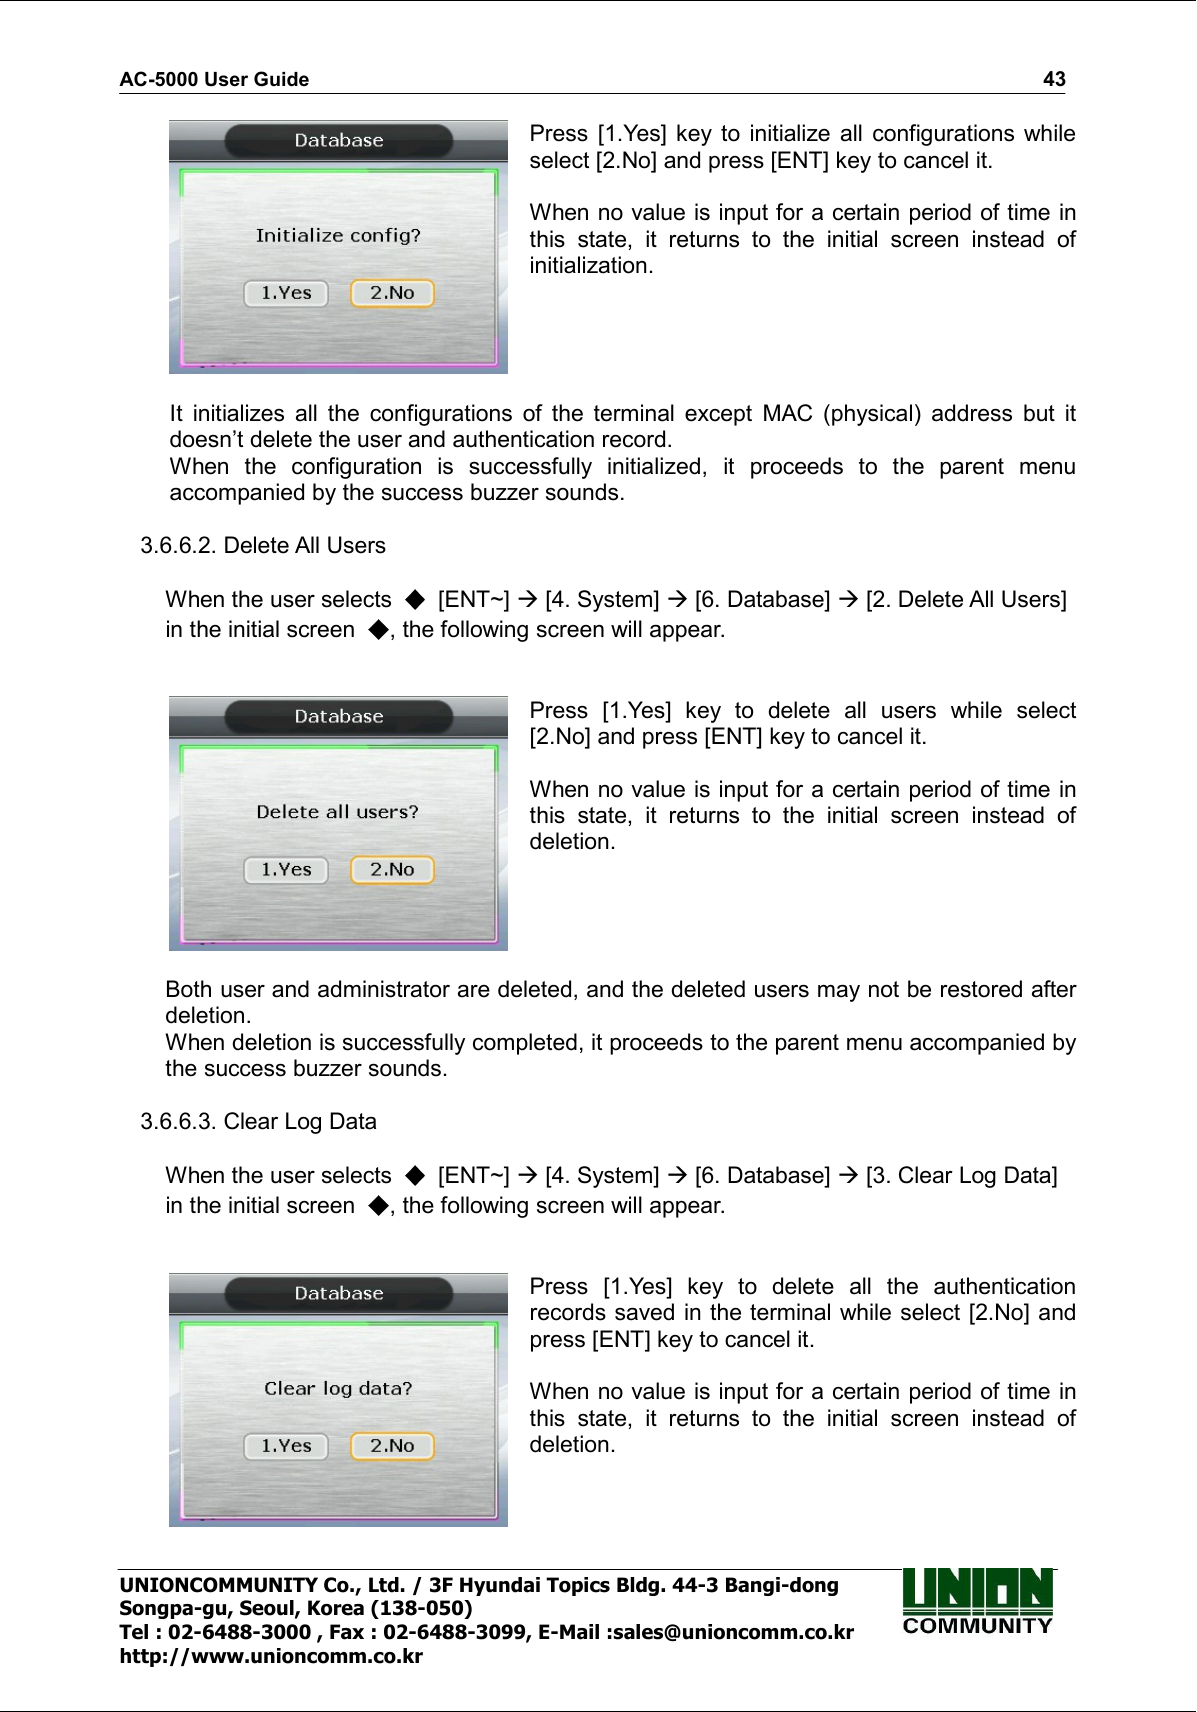 AC-5000 User Guide                                                                                                                                                   43 UNIONCOMMUNITY Co., Ltd. / 3F Hyundai Topics Bldg. 44-3 Bangi-dong Songpa-gu, Seoul, Korea (138-050) Tel : 02-6488-3000 , Fax : 02-6488-3099, E-Mail :sales@unioncomm.co.kr http://www.unioncomm.co.kr  Press  [1.Yes]  key  to initialize all  configurations while select [2.No] and press [ENT] key to cancel it.  When no value is input for a certain period of time in this  state,  it  returns  to  the  initial  screen  instead  of initialization.  It  initializes  all  the  configurations  of  the  terminal  except  MAC  (physical)  address  but  it doesn’t delete the user and authentication record. When  the  configuration  is  successfully  initialized,  it  proceeds  to  the  parent  menu accompanied by the success buzzer sounds.  3.6.6.2. Delete All Users  When the user selects    [ENT~]  [4. System]  [6. Database]  [2. Delete All Users] in the initial screen  , the following screen will appear.    Press  [1.Yes]  key  to  delete  all  users  while  select [2.No] and press [ENT] key to cancel it.  When no value is input for a certain period of time in this  state,  it  returns  to  the  initial  screen  instead  of deletion.  Both user and administrator are deleted, and the deleted users may not be restored after deletion. When deletion is successfully completed, it proceeds to the parent menu accompanied by the success buzzer sounds.  3.6.6.3. Clear Log Data  When the user selects    [ENT~]  [4. System]  [6. Database]  [3. Clear Log Data] in the initial screen  , the following screen will appear.    Press  [1.Yes]  key  to  delete  all  the  authentication records saved in the terminal while select [2.No] and press [ENT] key to cancel it.  When no value is input for a certain period of time in this  state,  it  returns  to  the  initial  screen  instead  of deletion. 